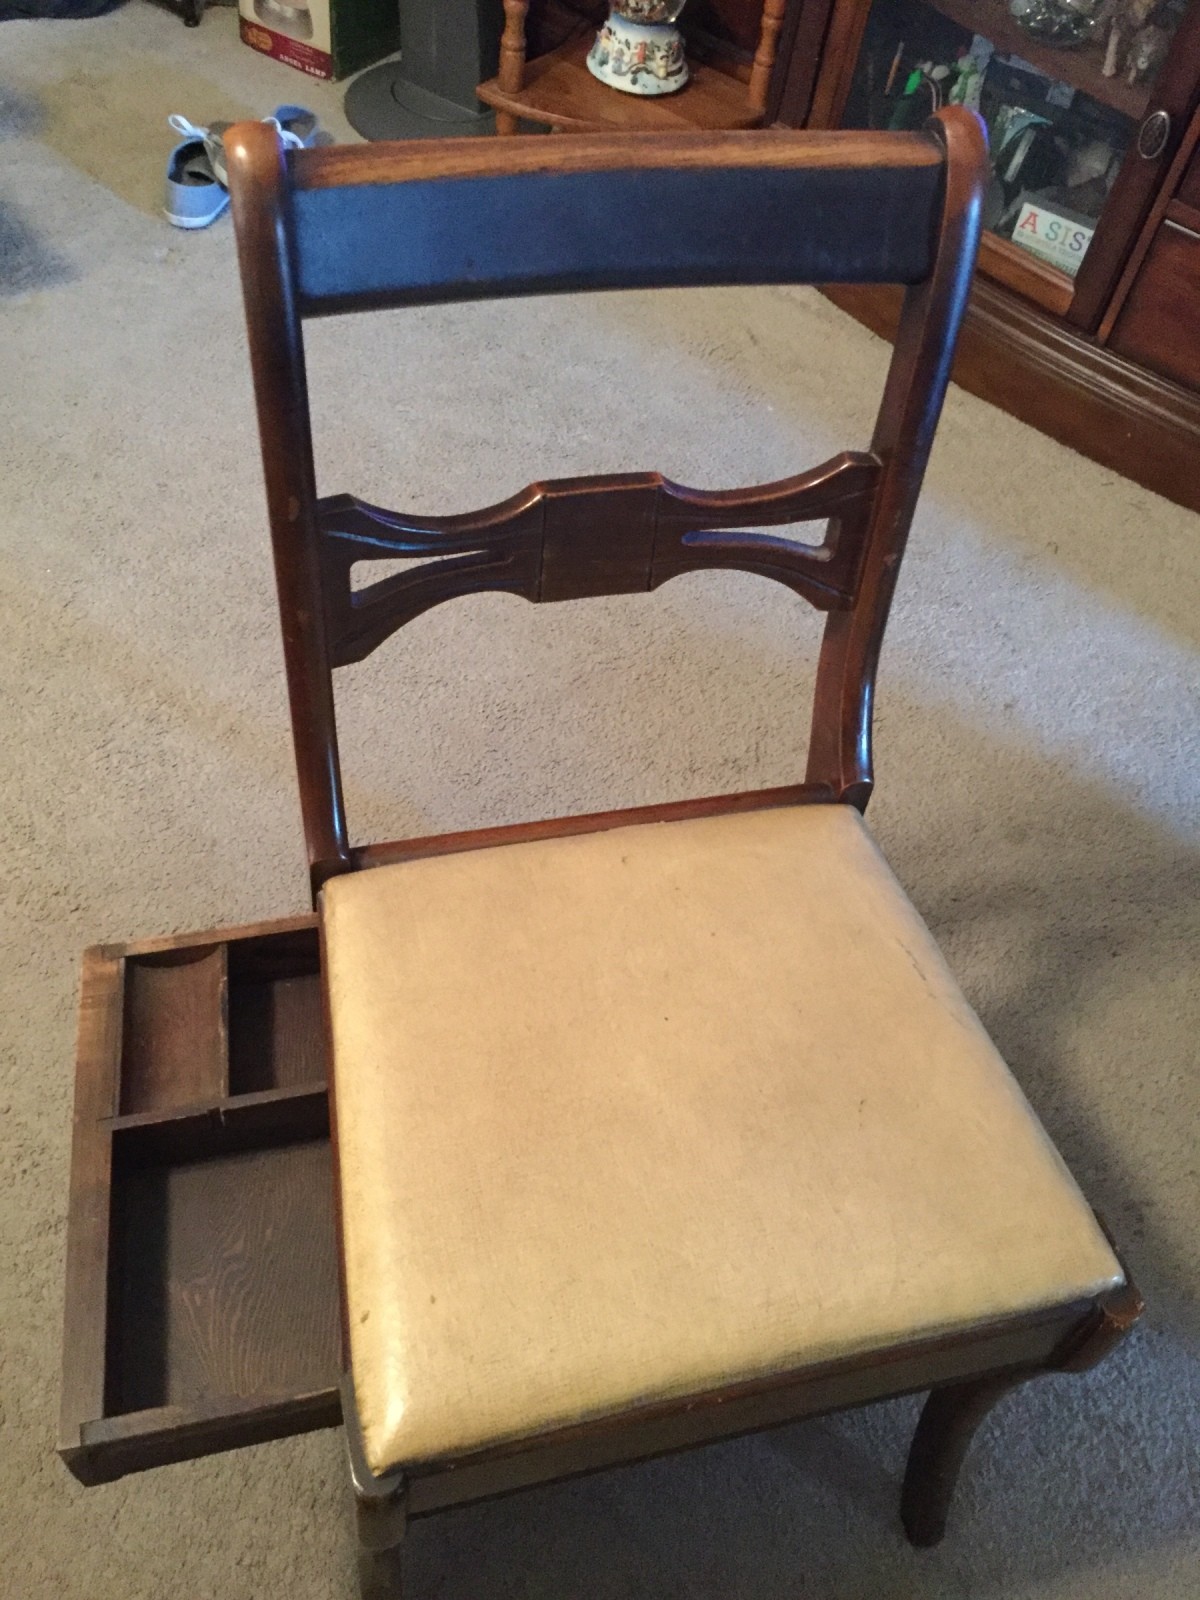 Finding The Value Of Murphy Chairs Thriftyfun